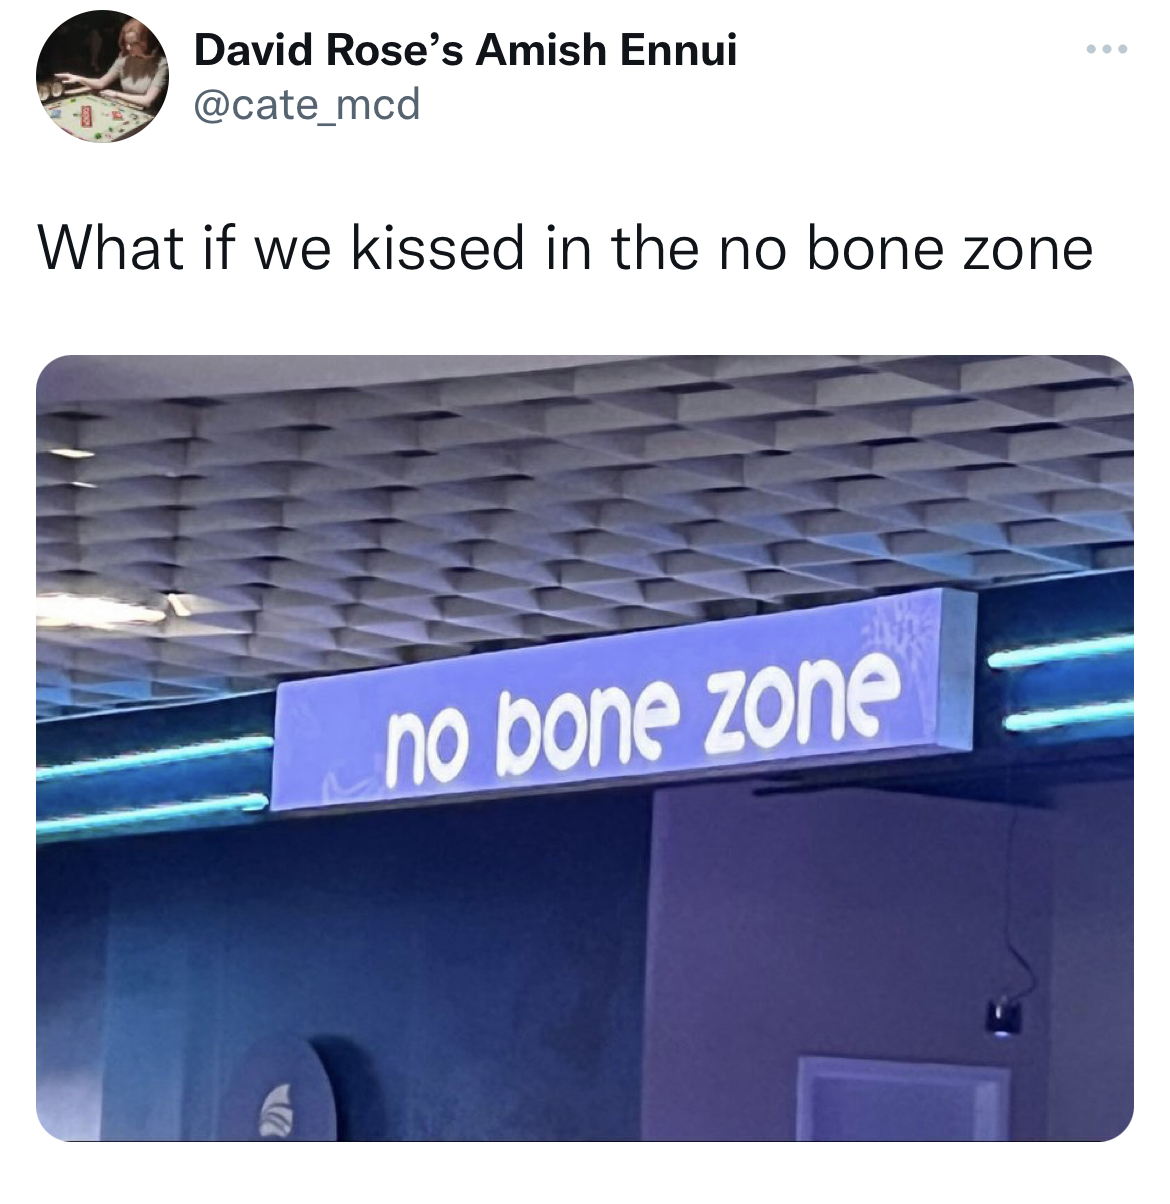 Untamed Tweets - angle - David Rose's Amish Ennui What if we kissed in the no bone zone S no bone zone